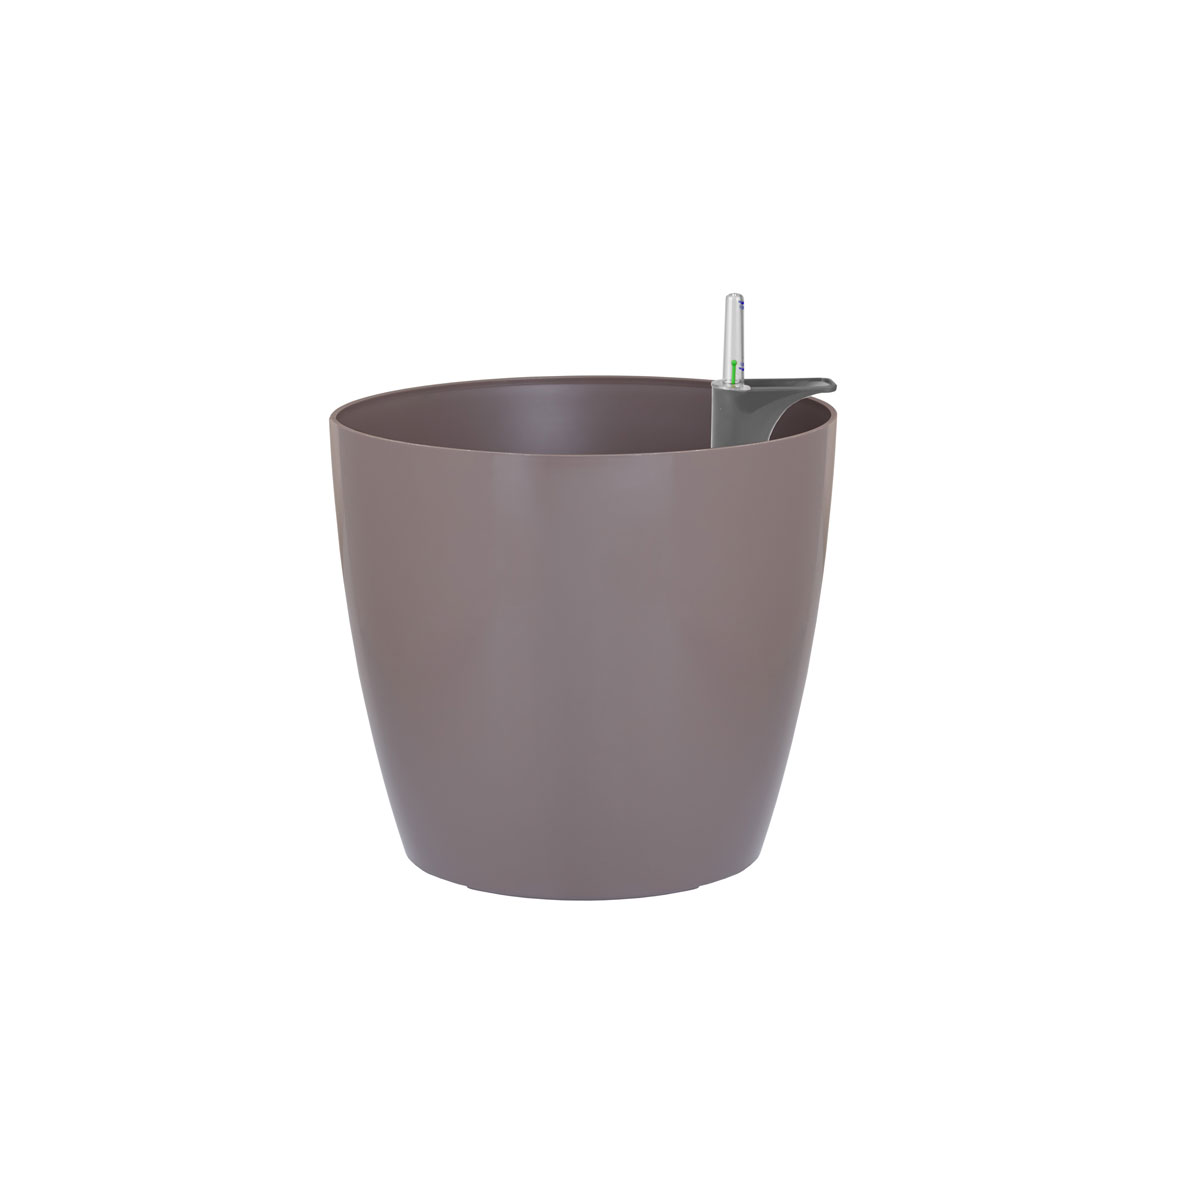 Pflanztopf San Remo 241014 2,09 | taupe 39 39 kg Kunststoff L | | taupe